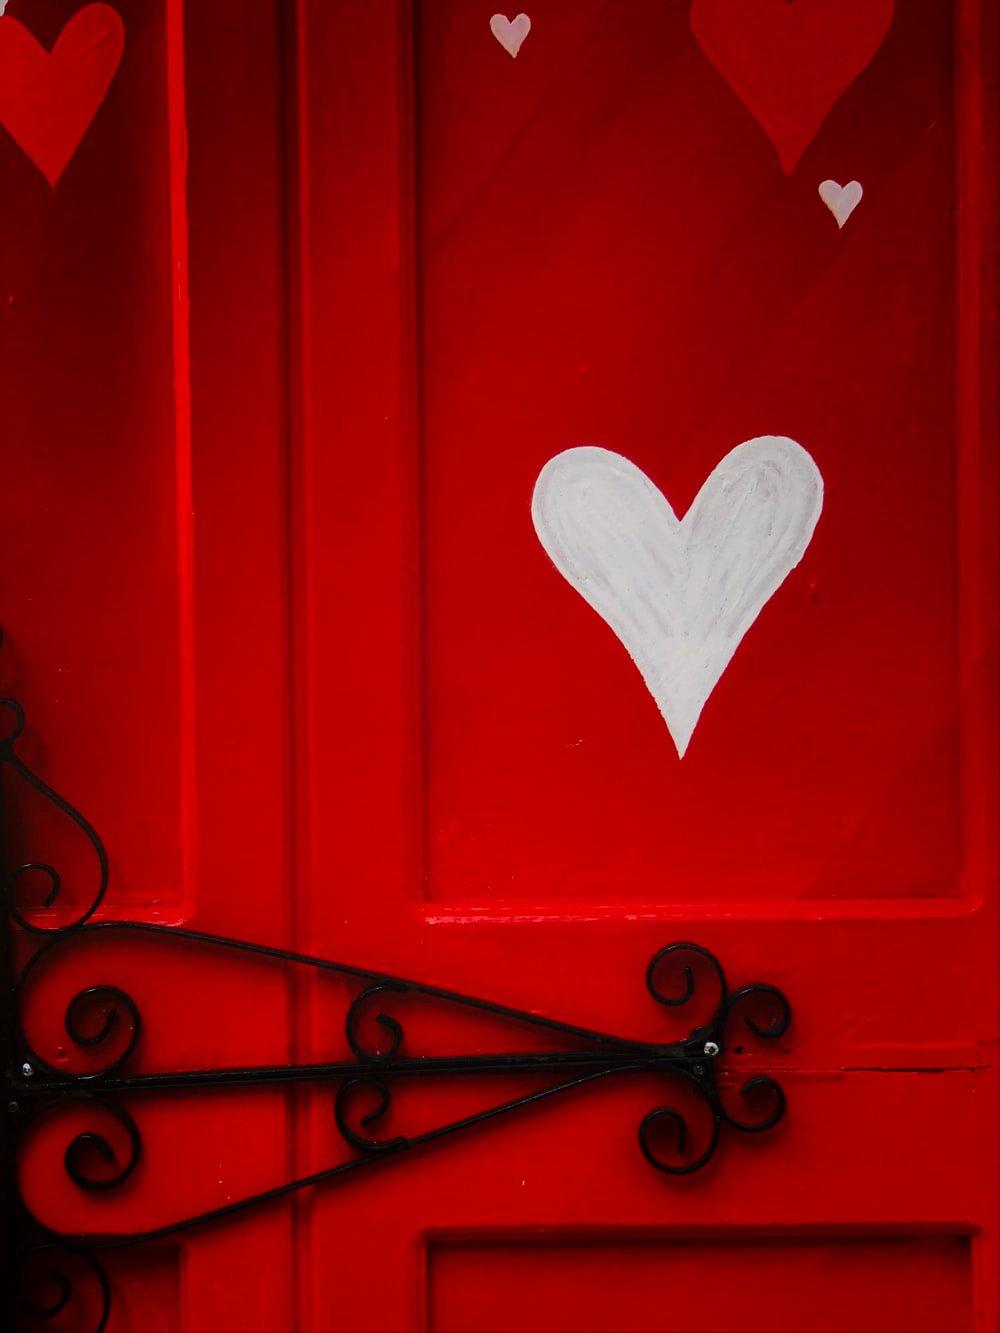 Red Love Picture. Download Free Image